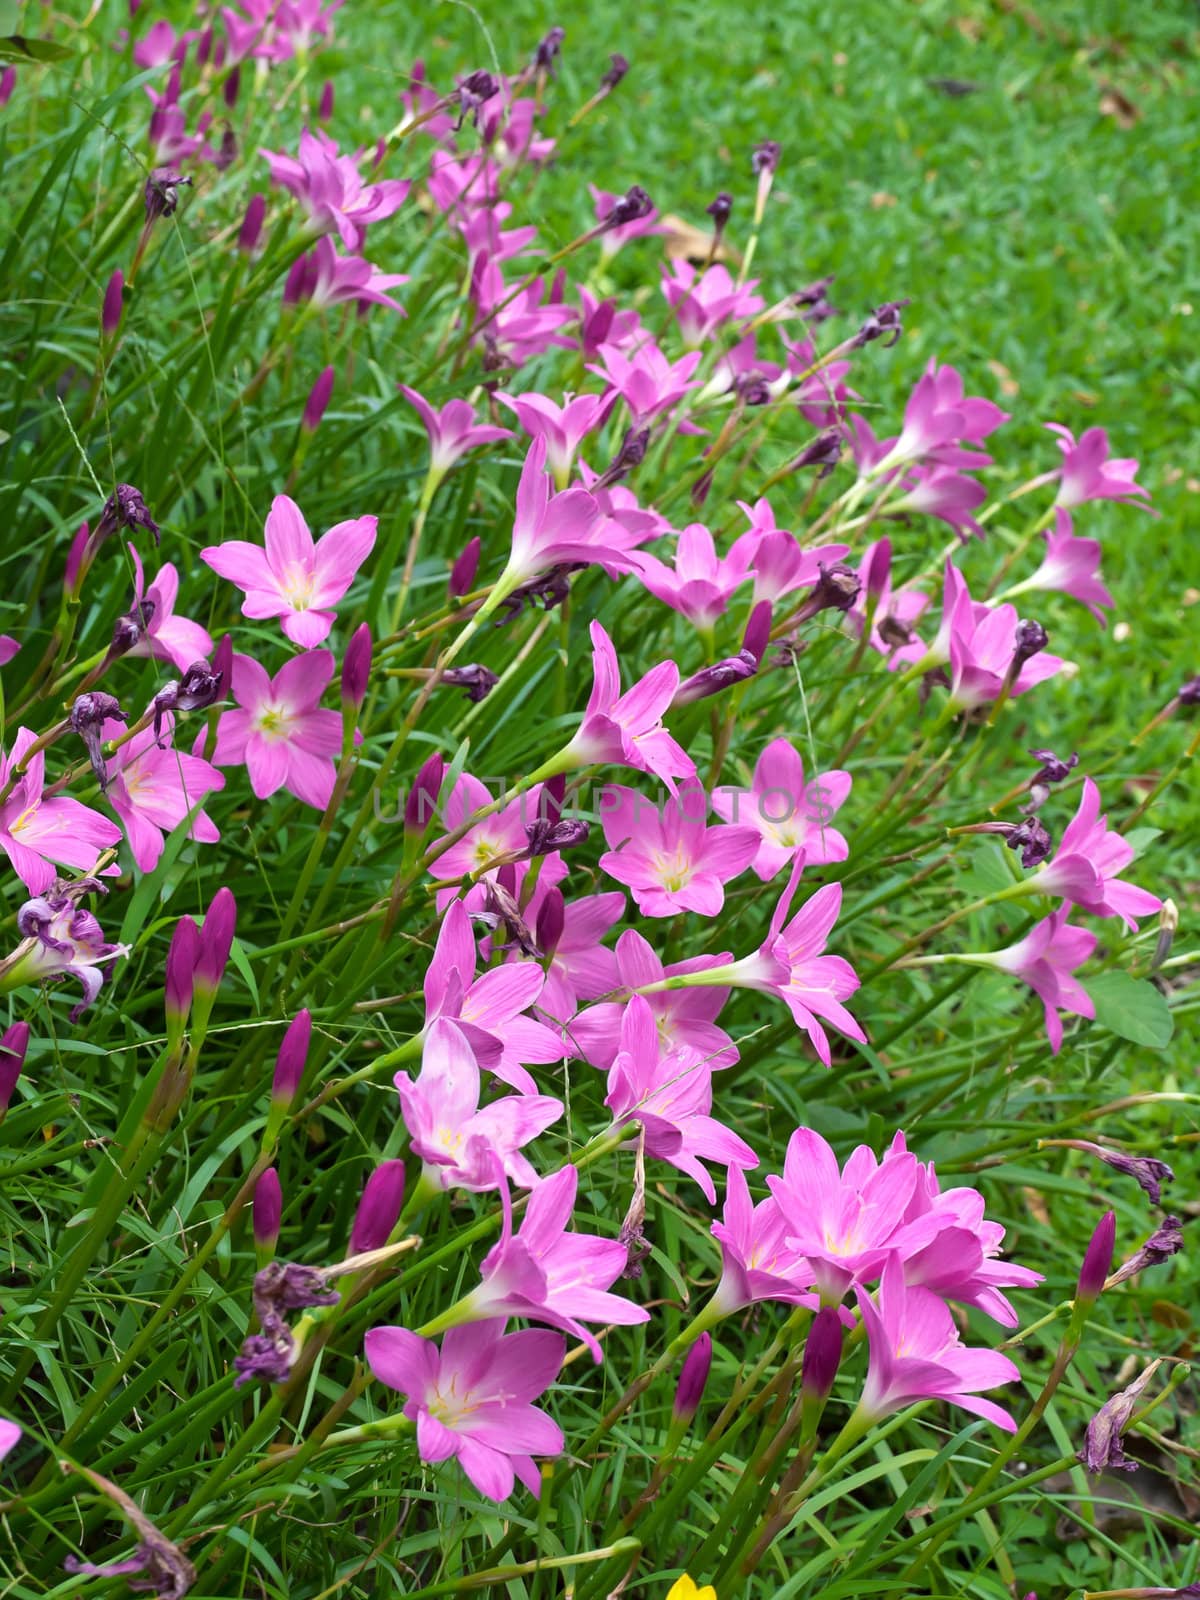 Fairy Lily(Zephyranthes rosea, know as Rain Lily) blooming in rainy season